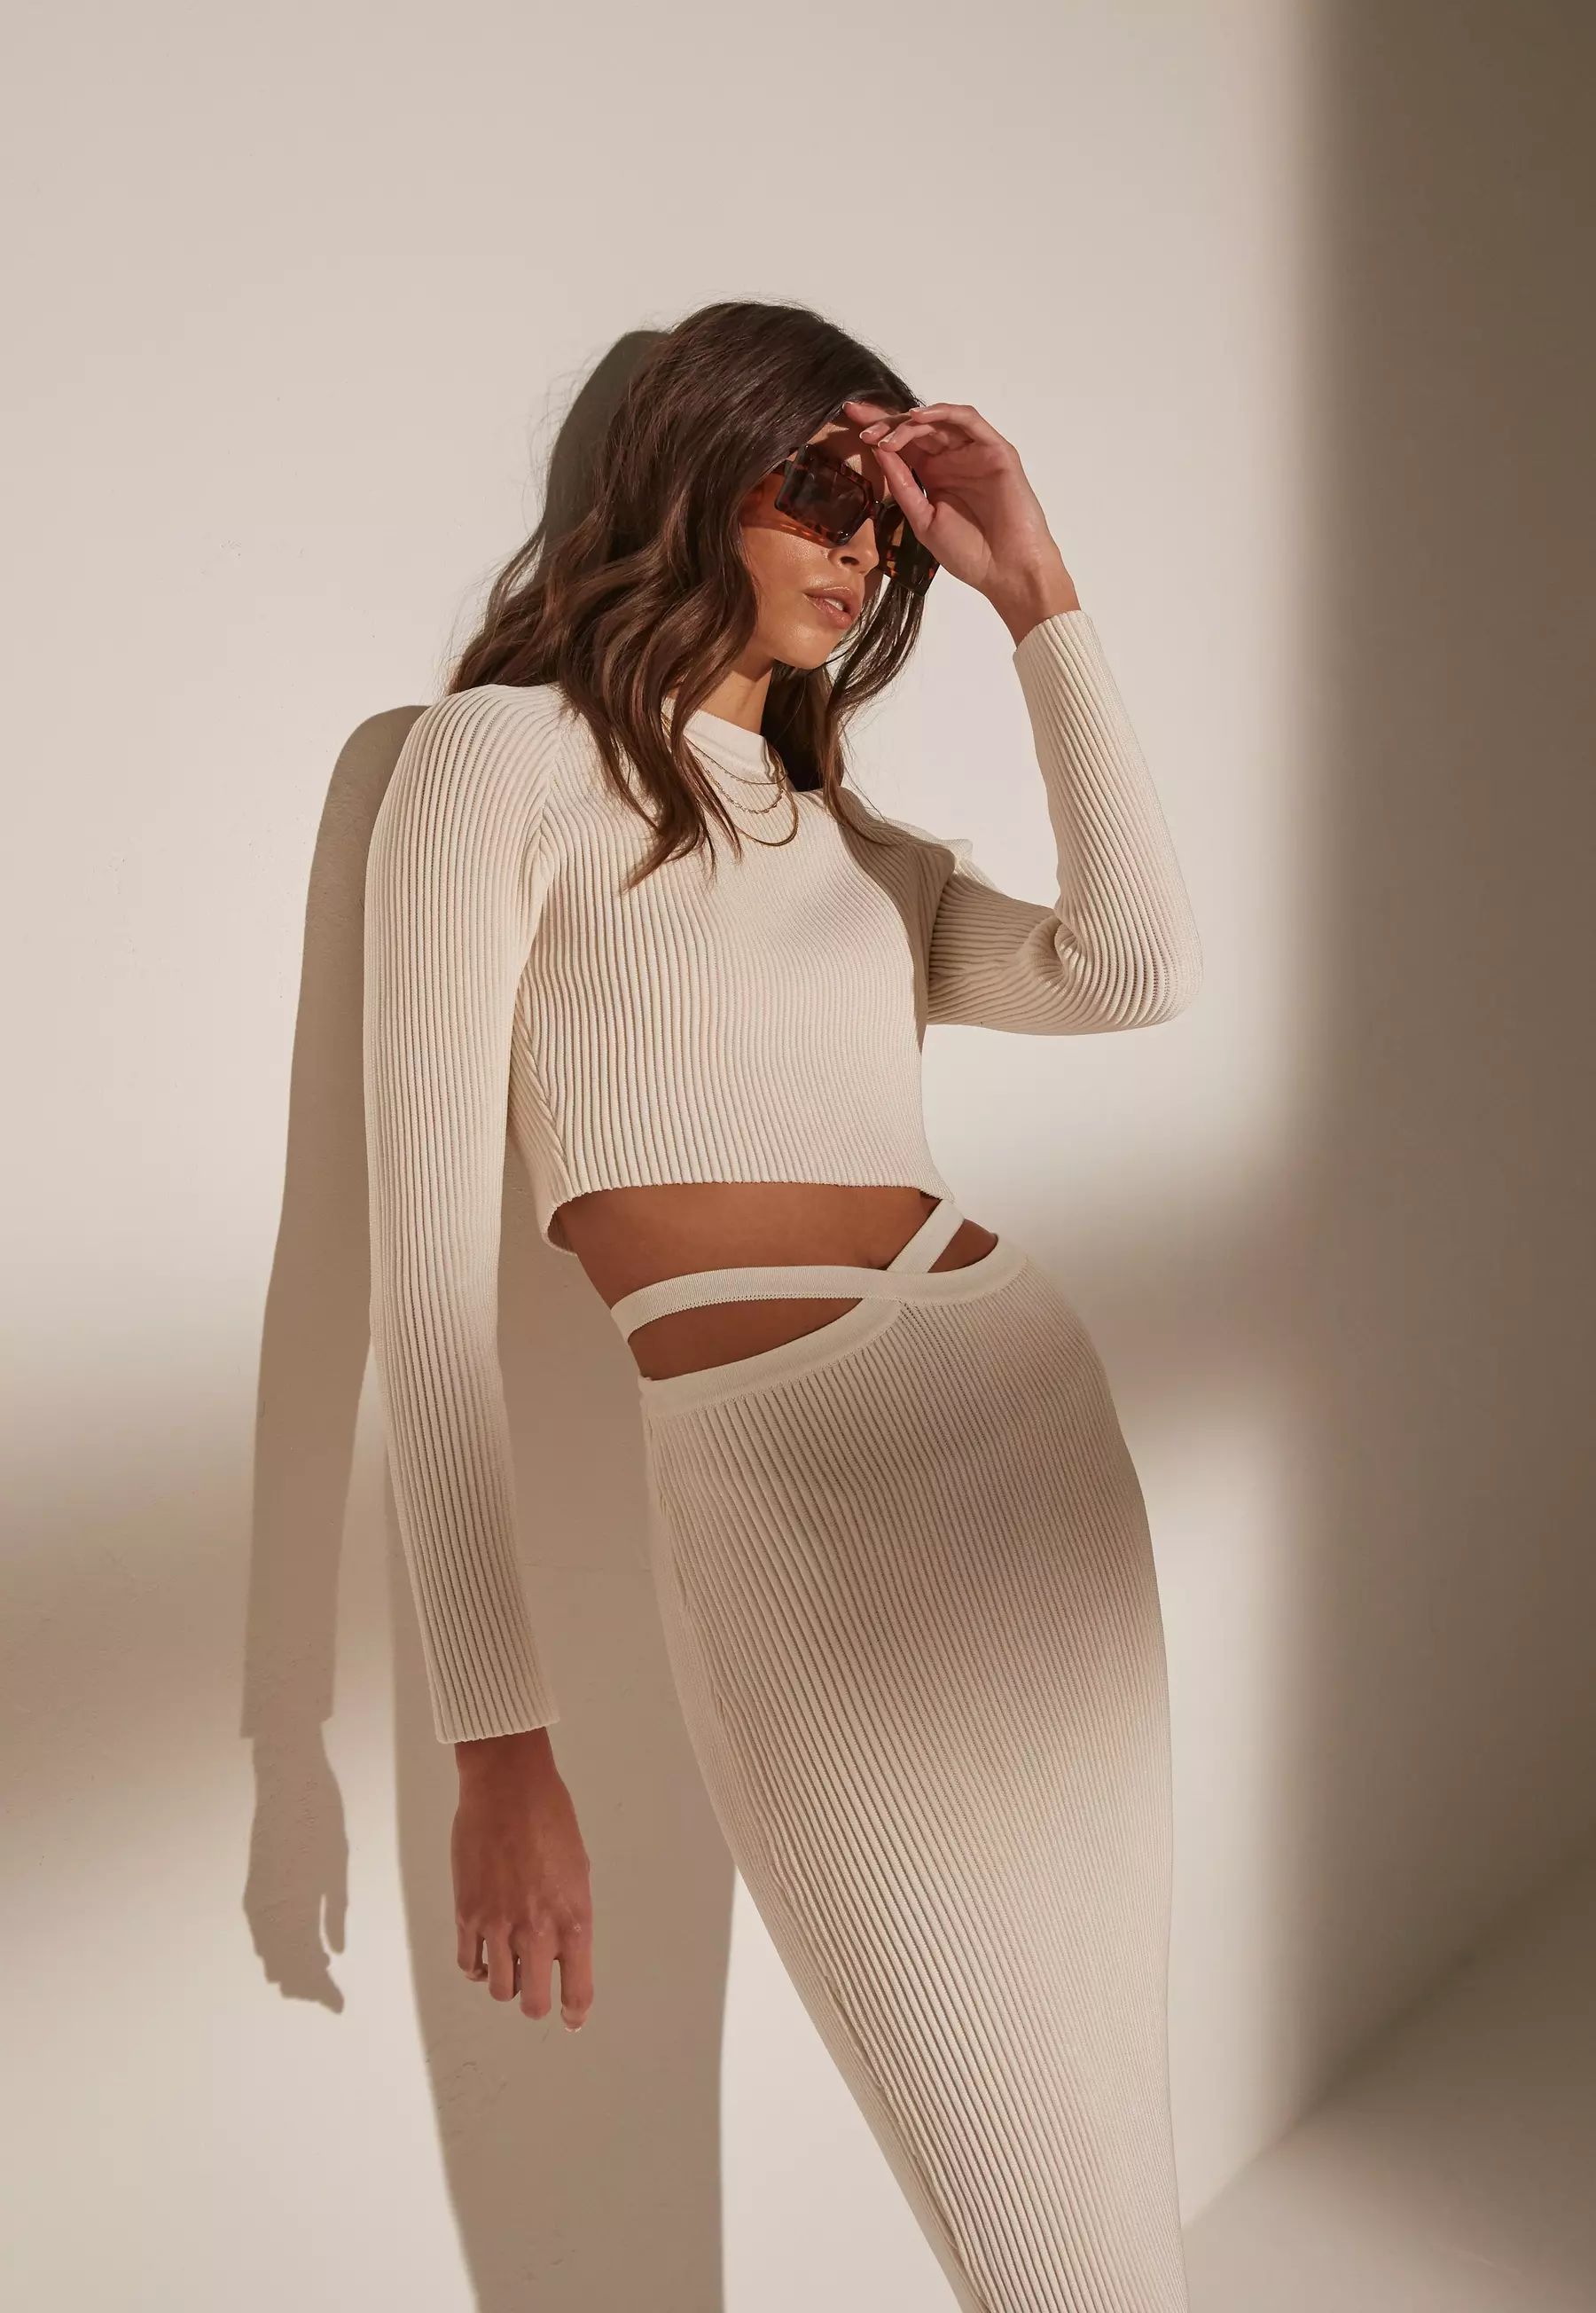 Missguided - Re_Styld Cream Rib Knit Crop Top | Missguided (UK & IE)